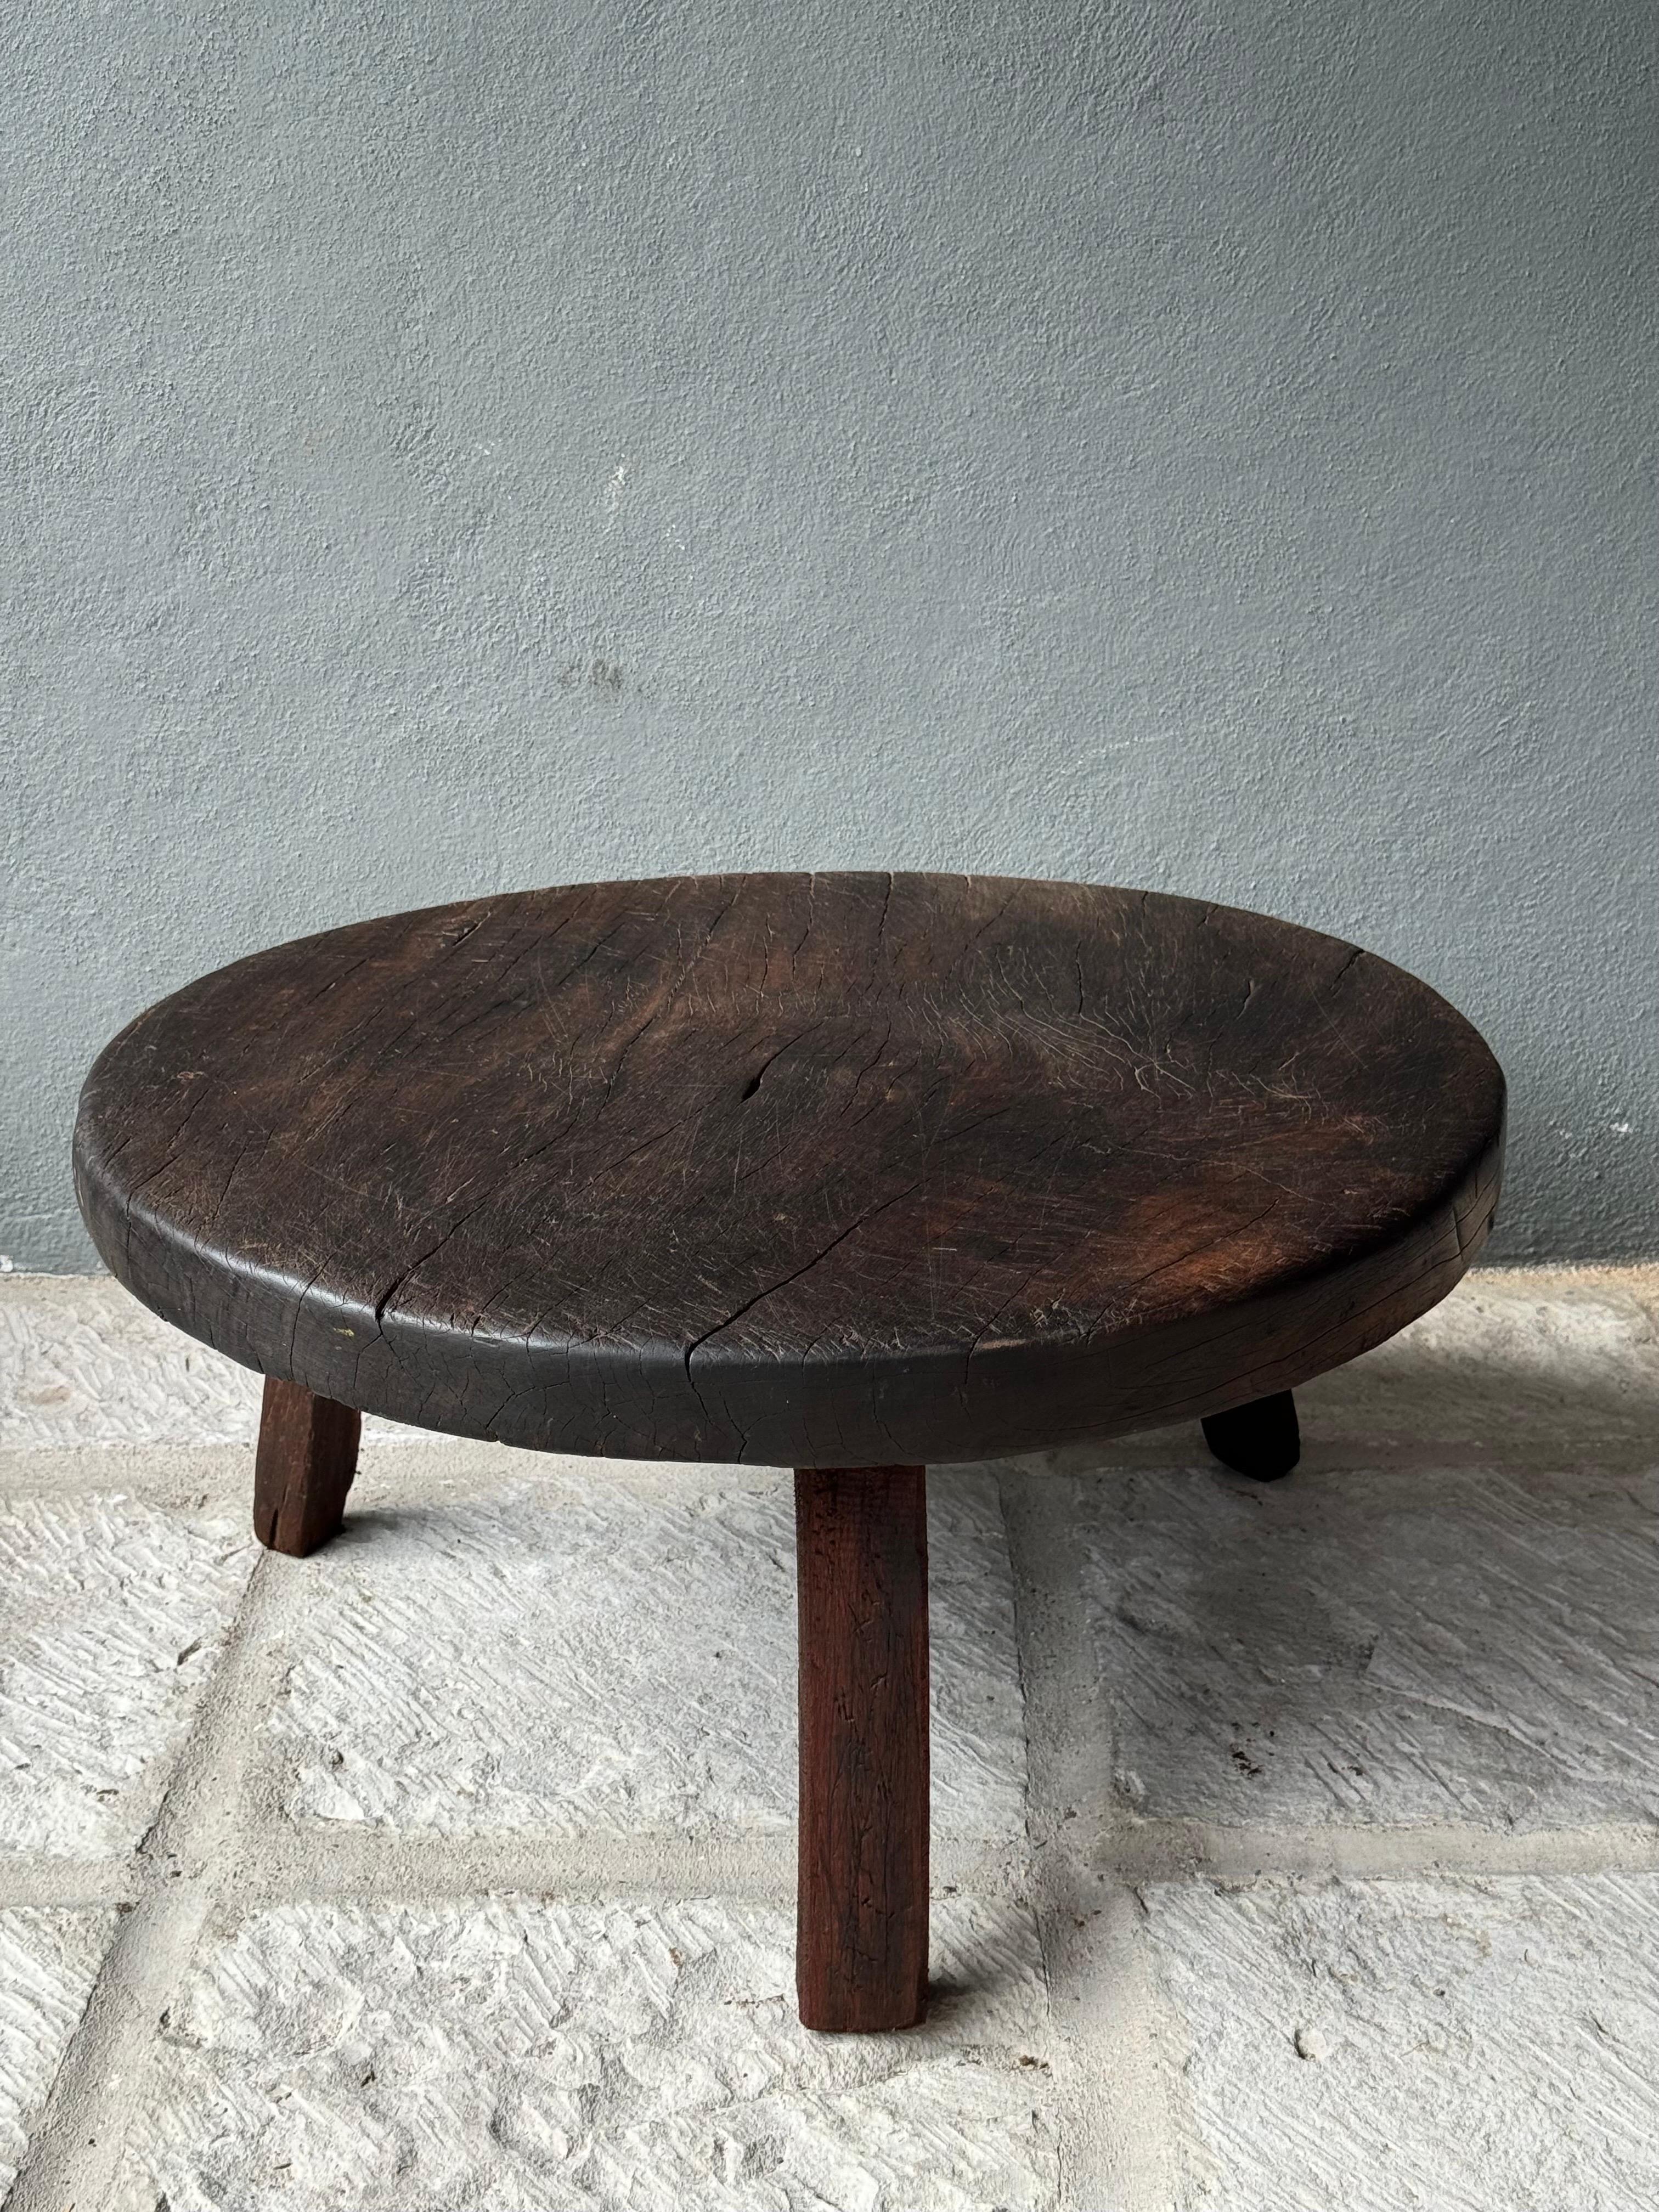 Primitive Hardwood Round Table From Central Yucatan, Mexico, Mid 20th Century For Sale 4